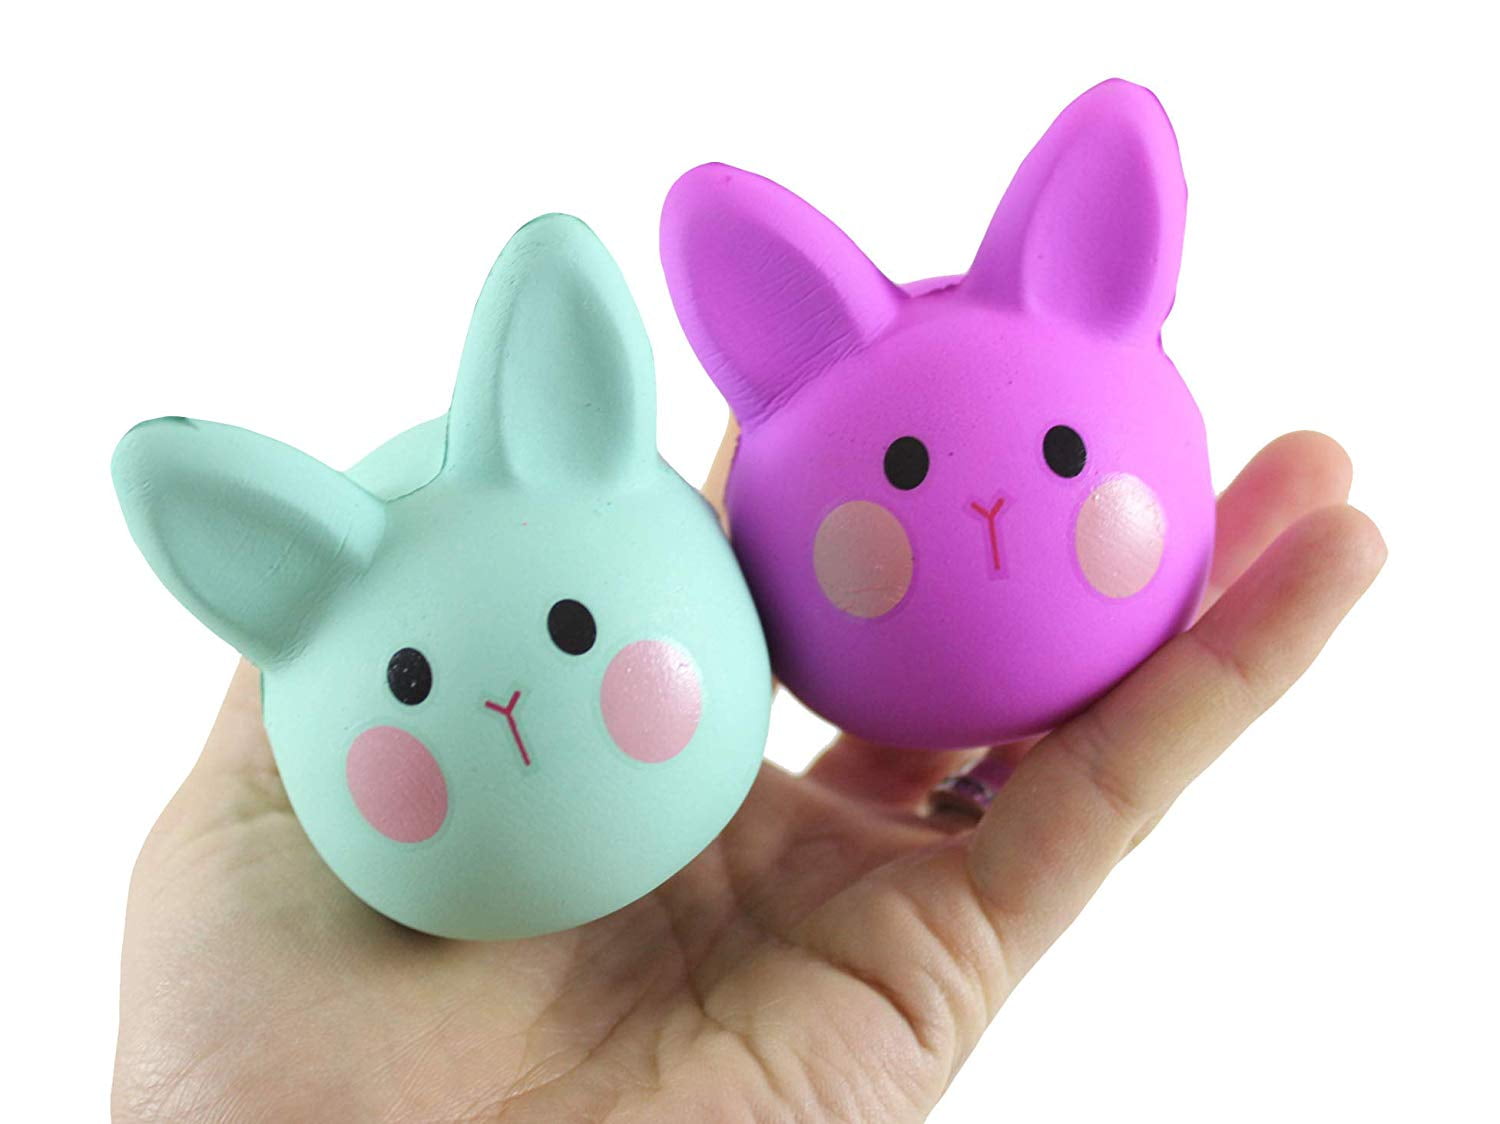 Details about   Easter Bunny Rabbits & Eggs Squishy Soft Sensory Stress Toys 